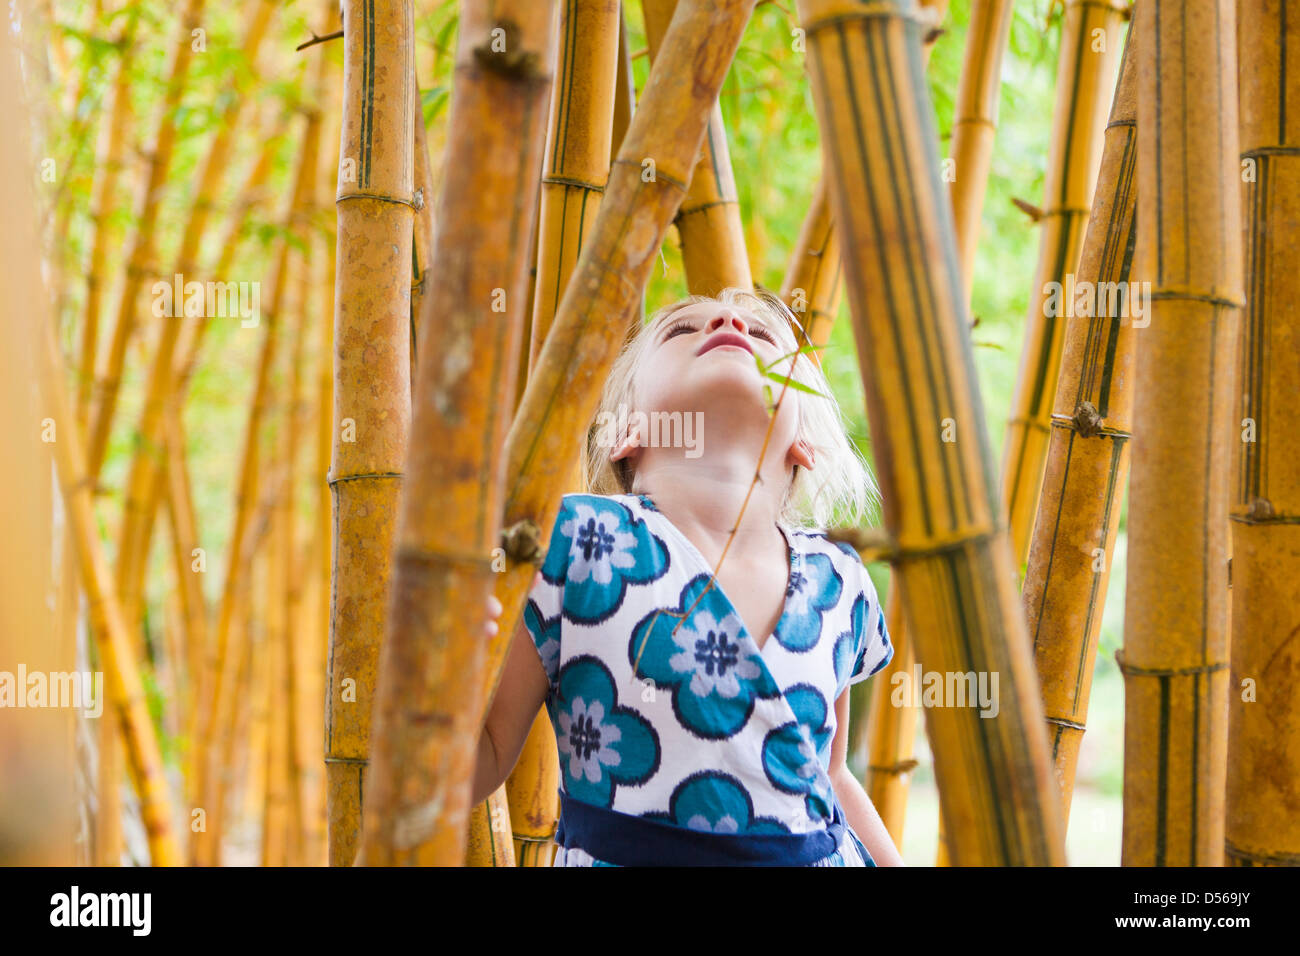 Caucasian girl looking at bamboo stalks Banque D'Images